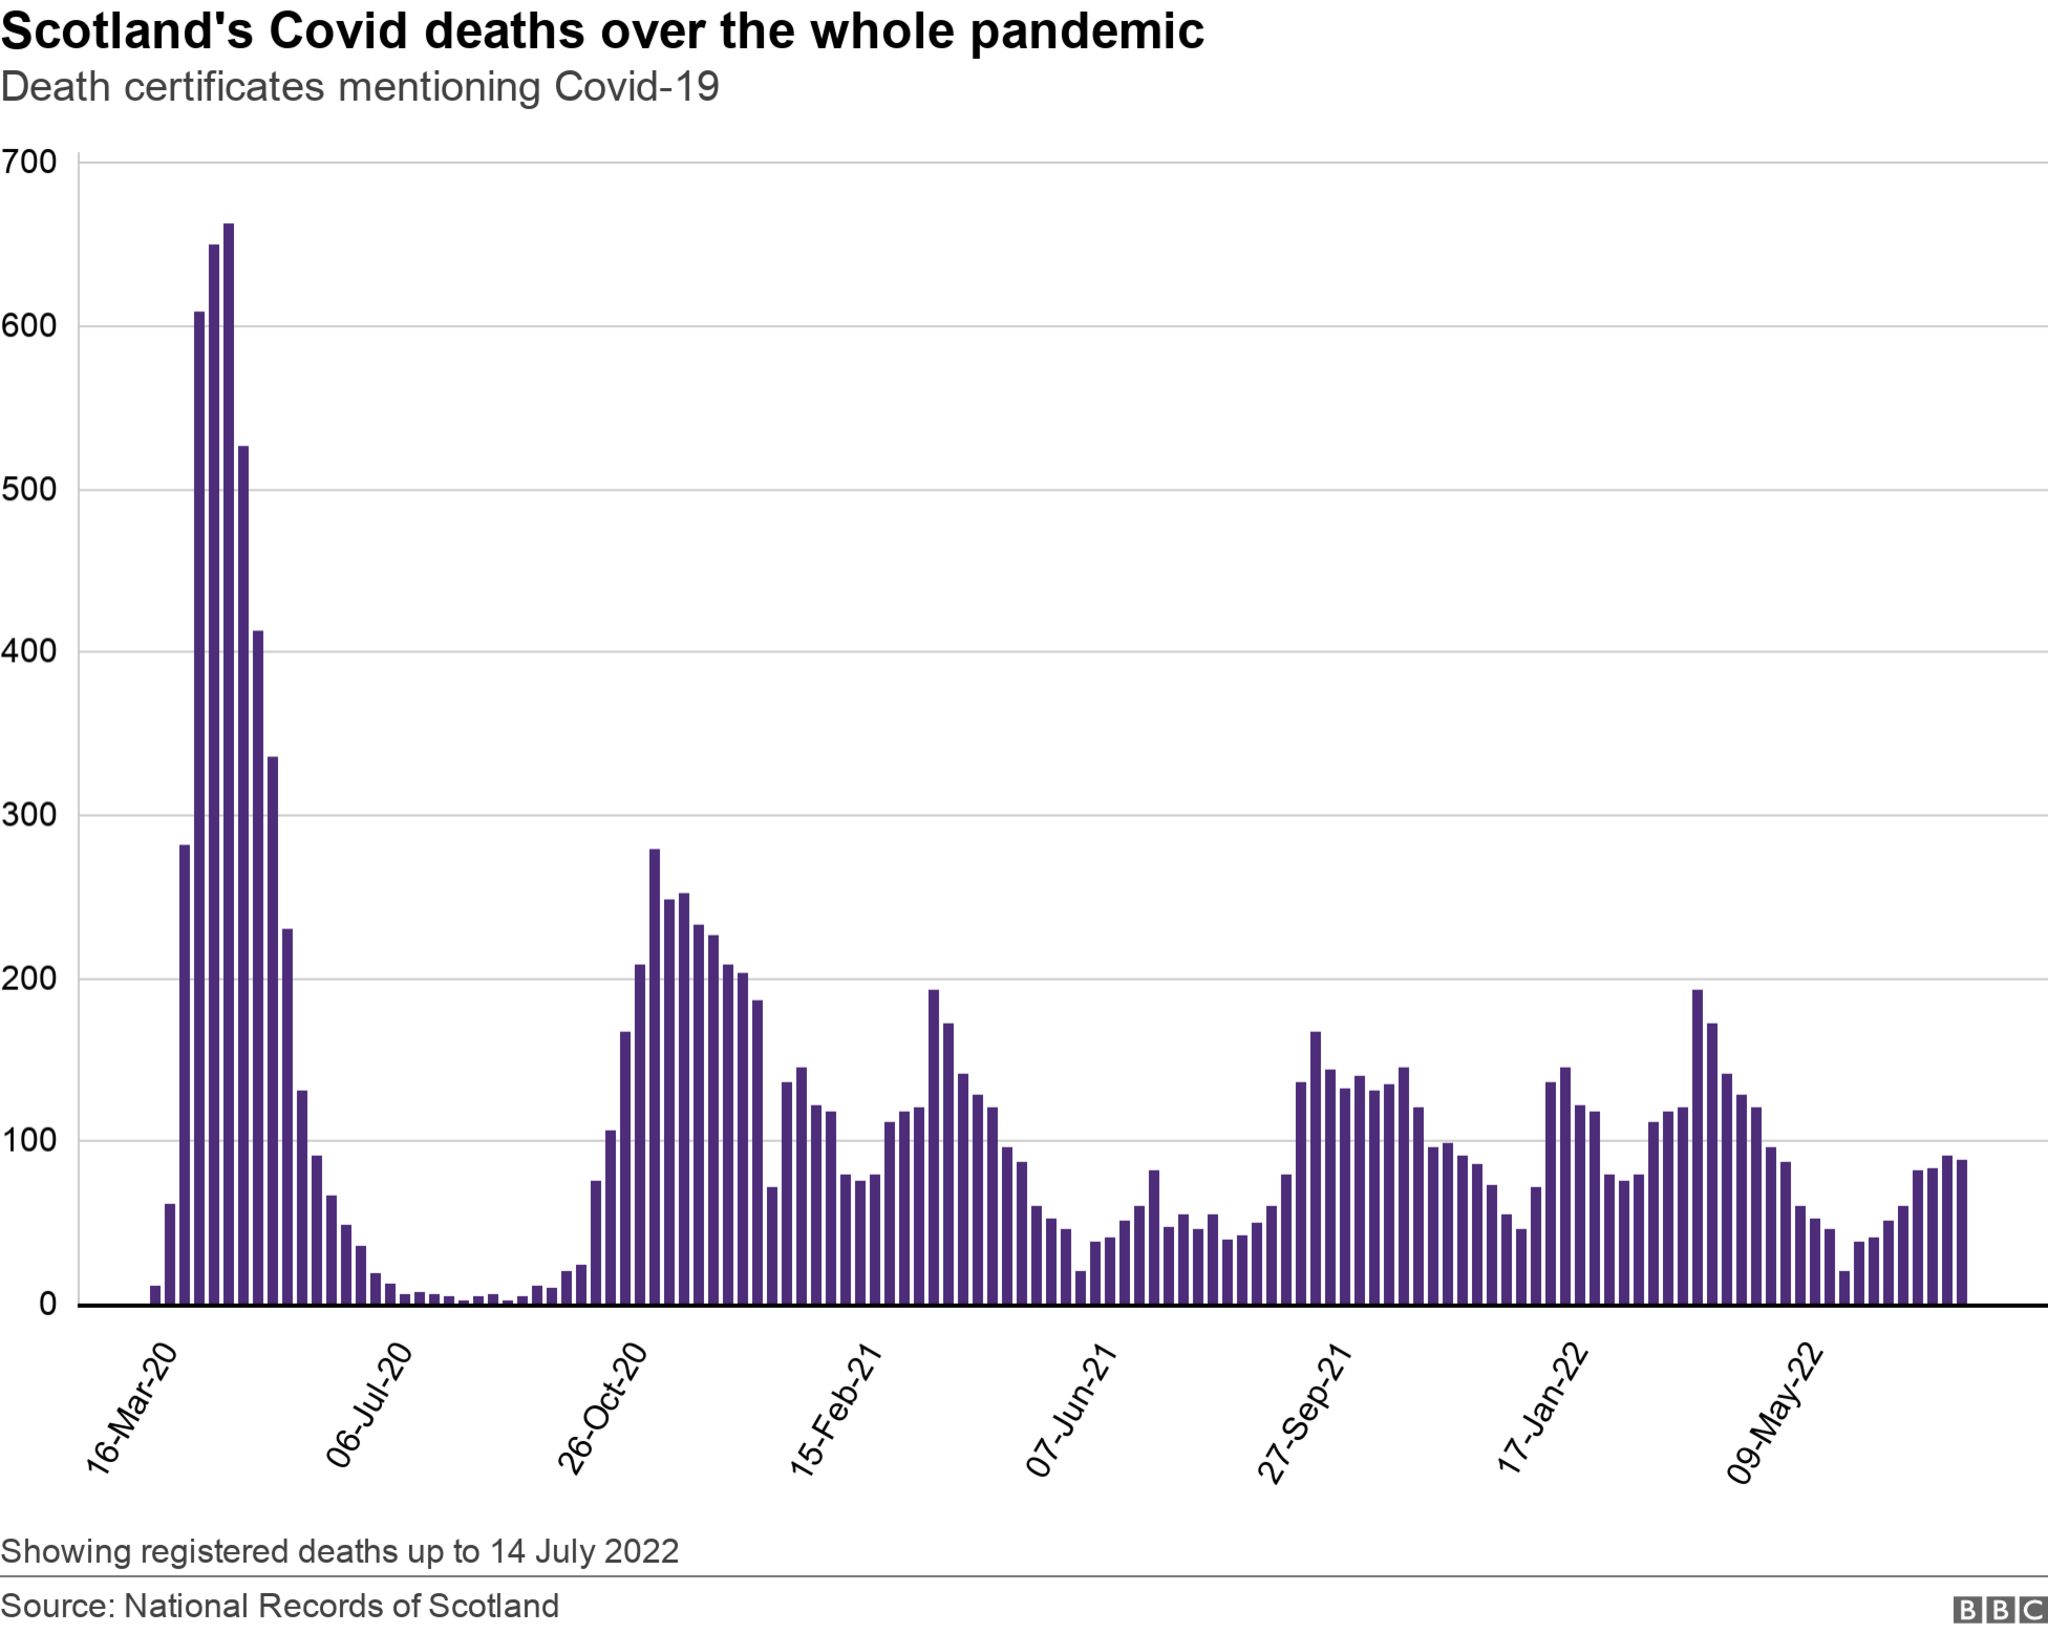 Deaths over pandemic - August 5